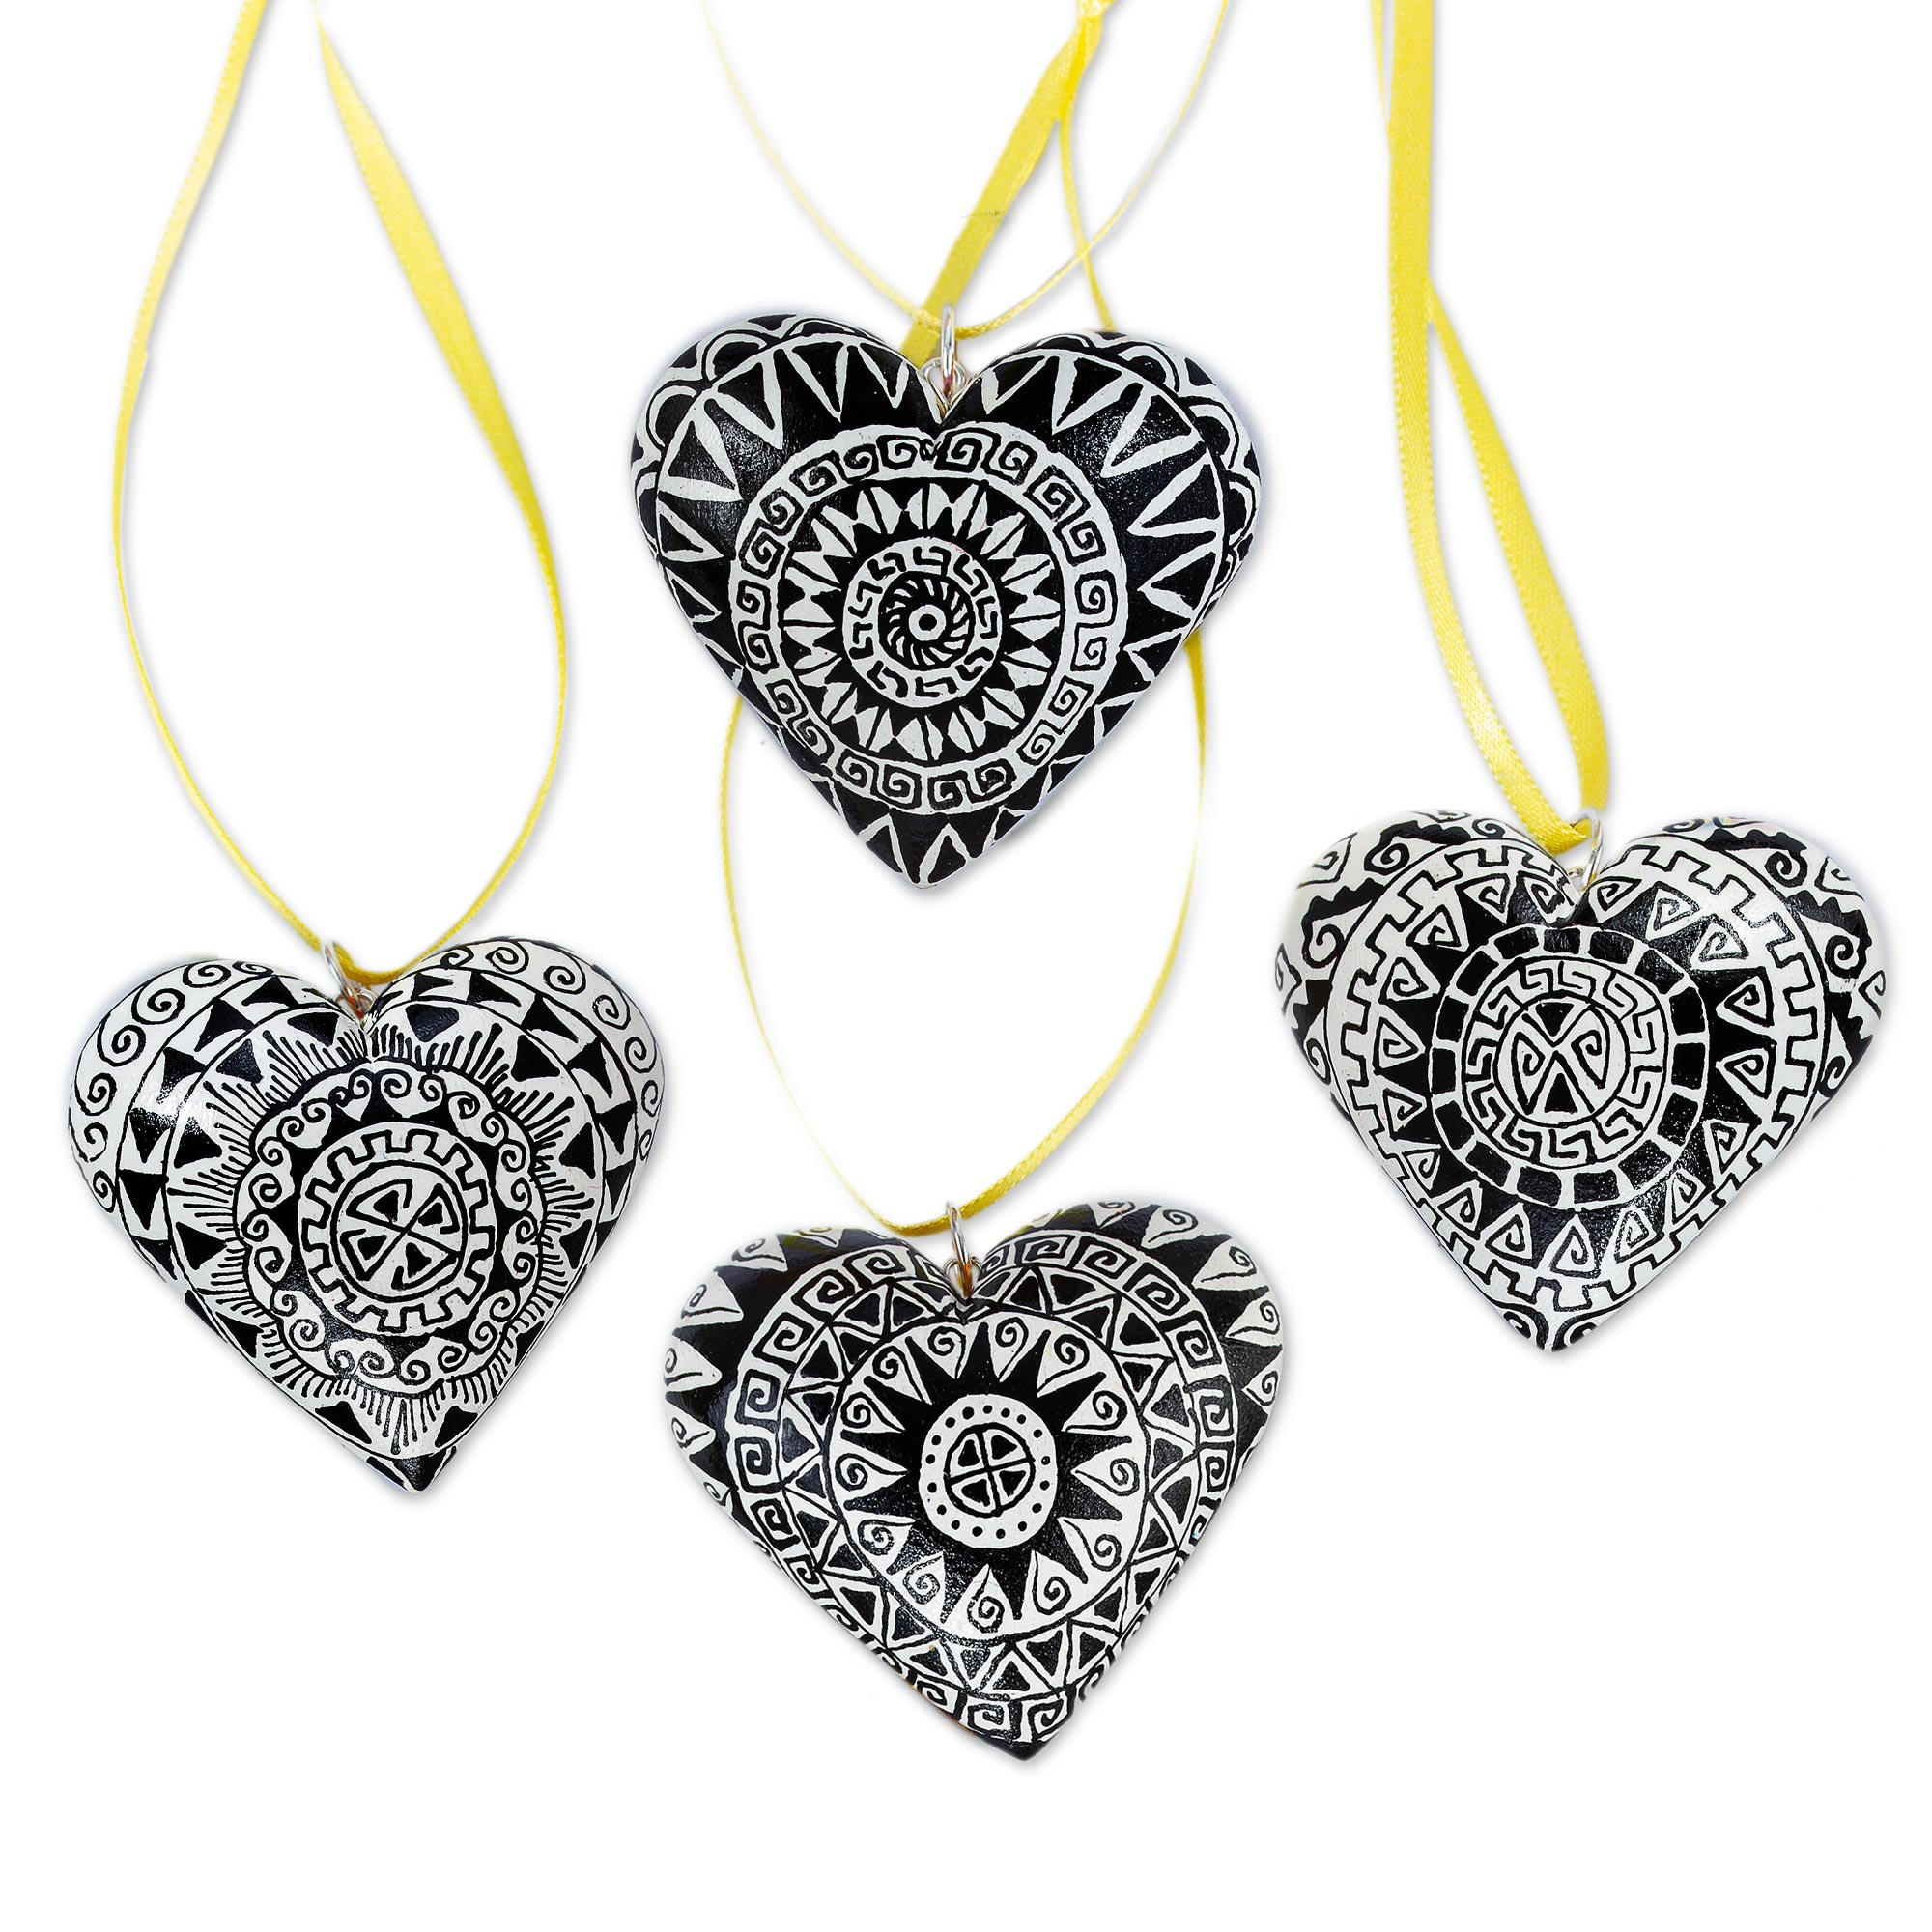 4 Zapotec Hand Painted Black and White Wood Heart Ornaments, 'Zapotec Heart